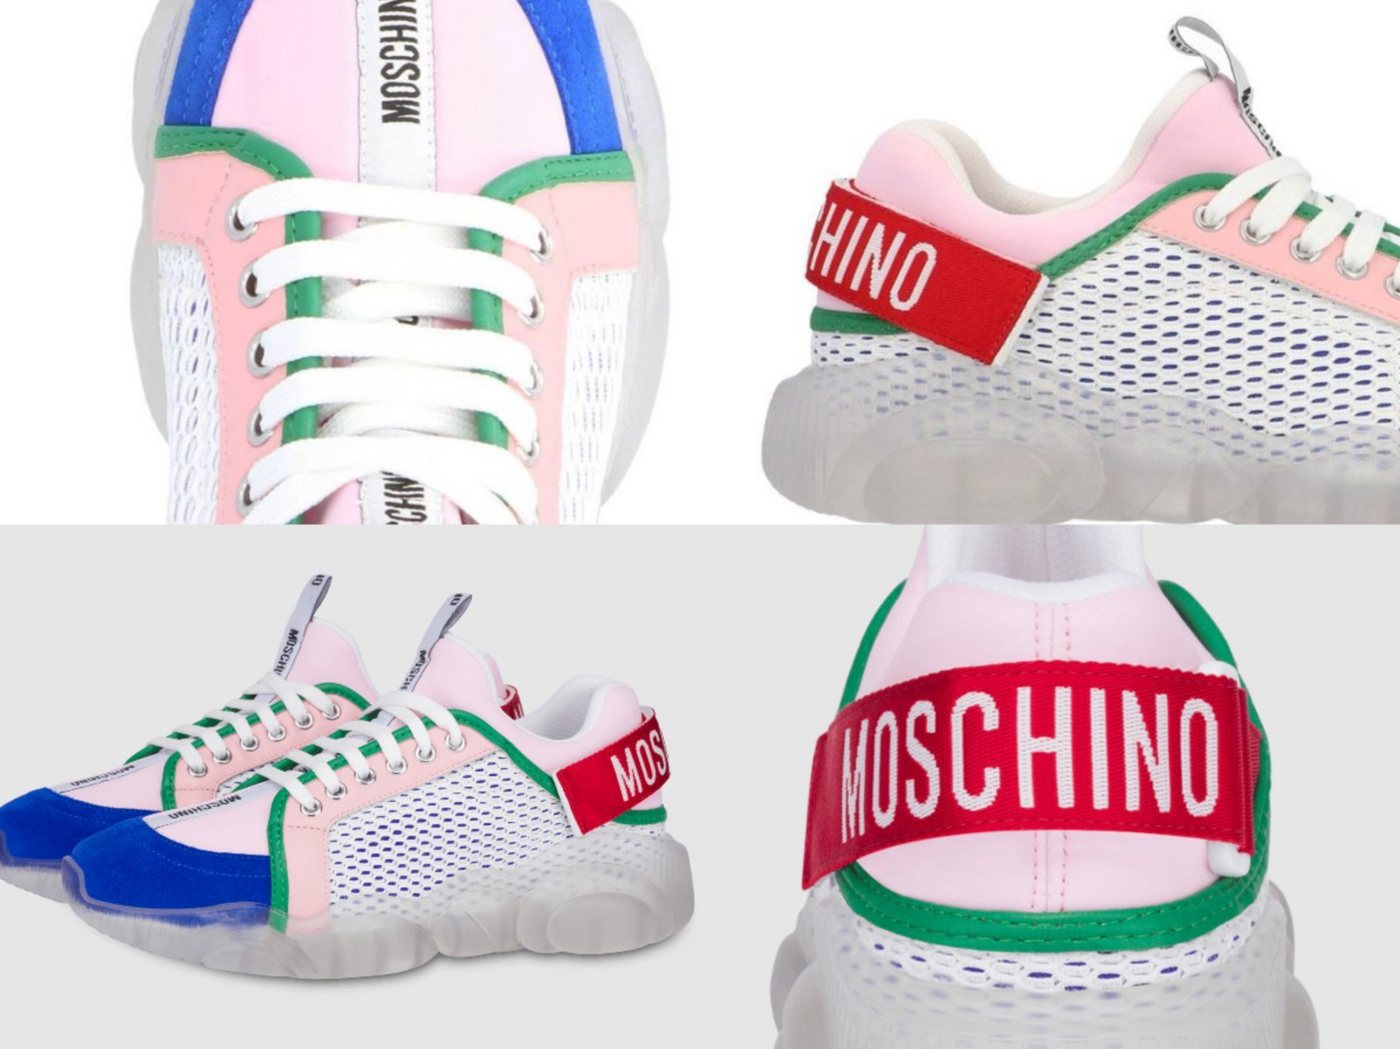 Moschino MOSCHINO COUTURE Special Teddy Low Sneakers Trainers Schuhe Turnschuhe Sneaker von Moschino